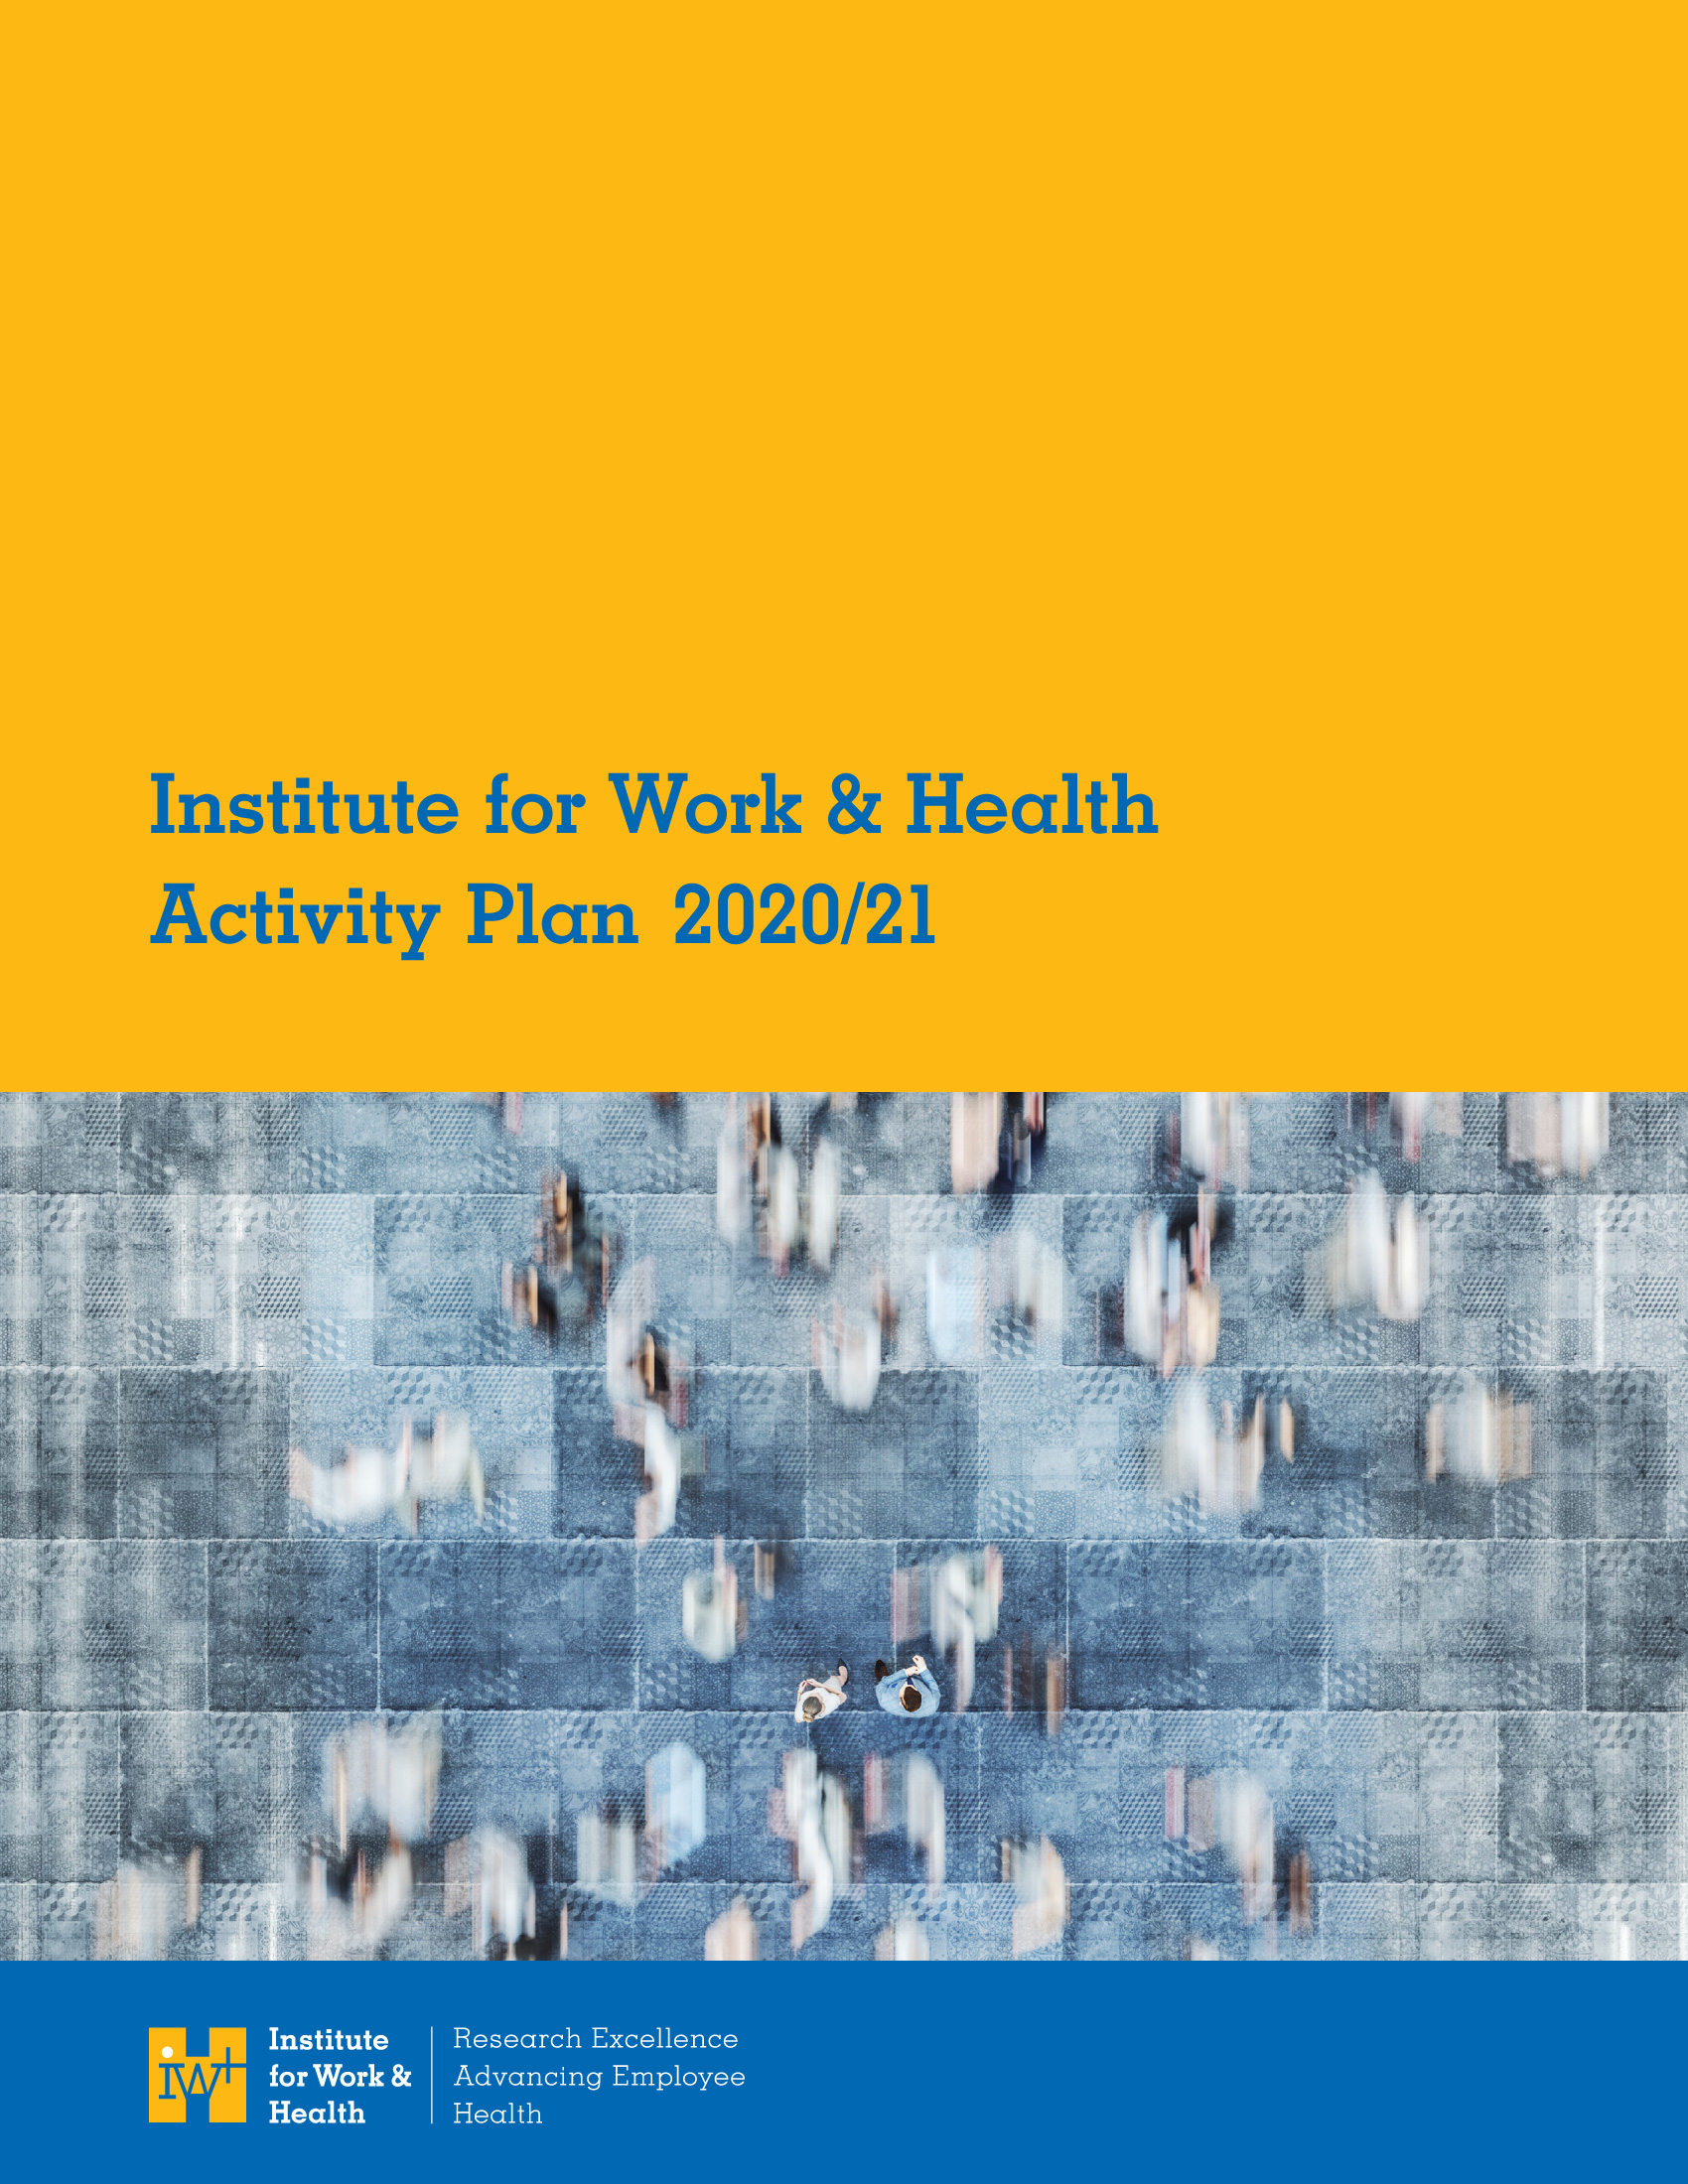 Cover of Institute for Work & Health 2020-21 Activity Plan